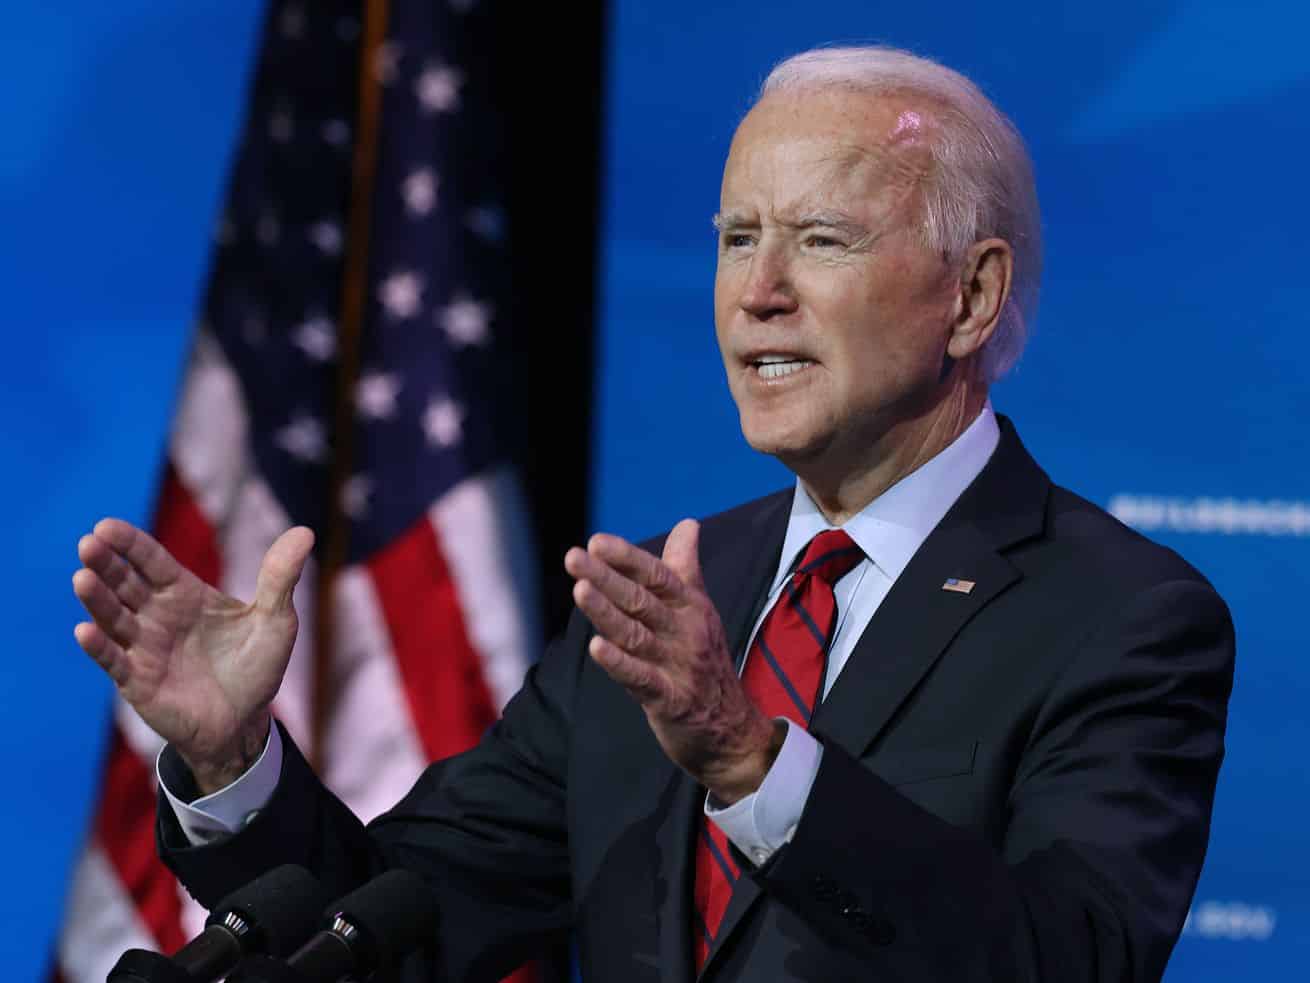 What Biden should do if he’s serious about bringing down US health care costs